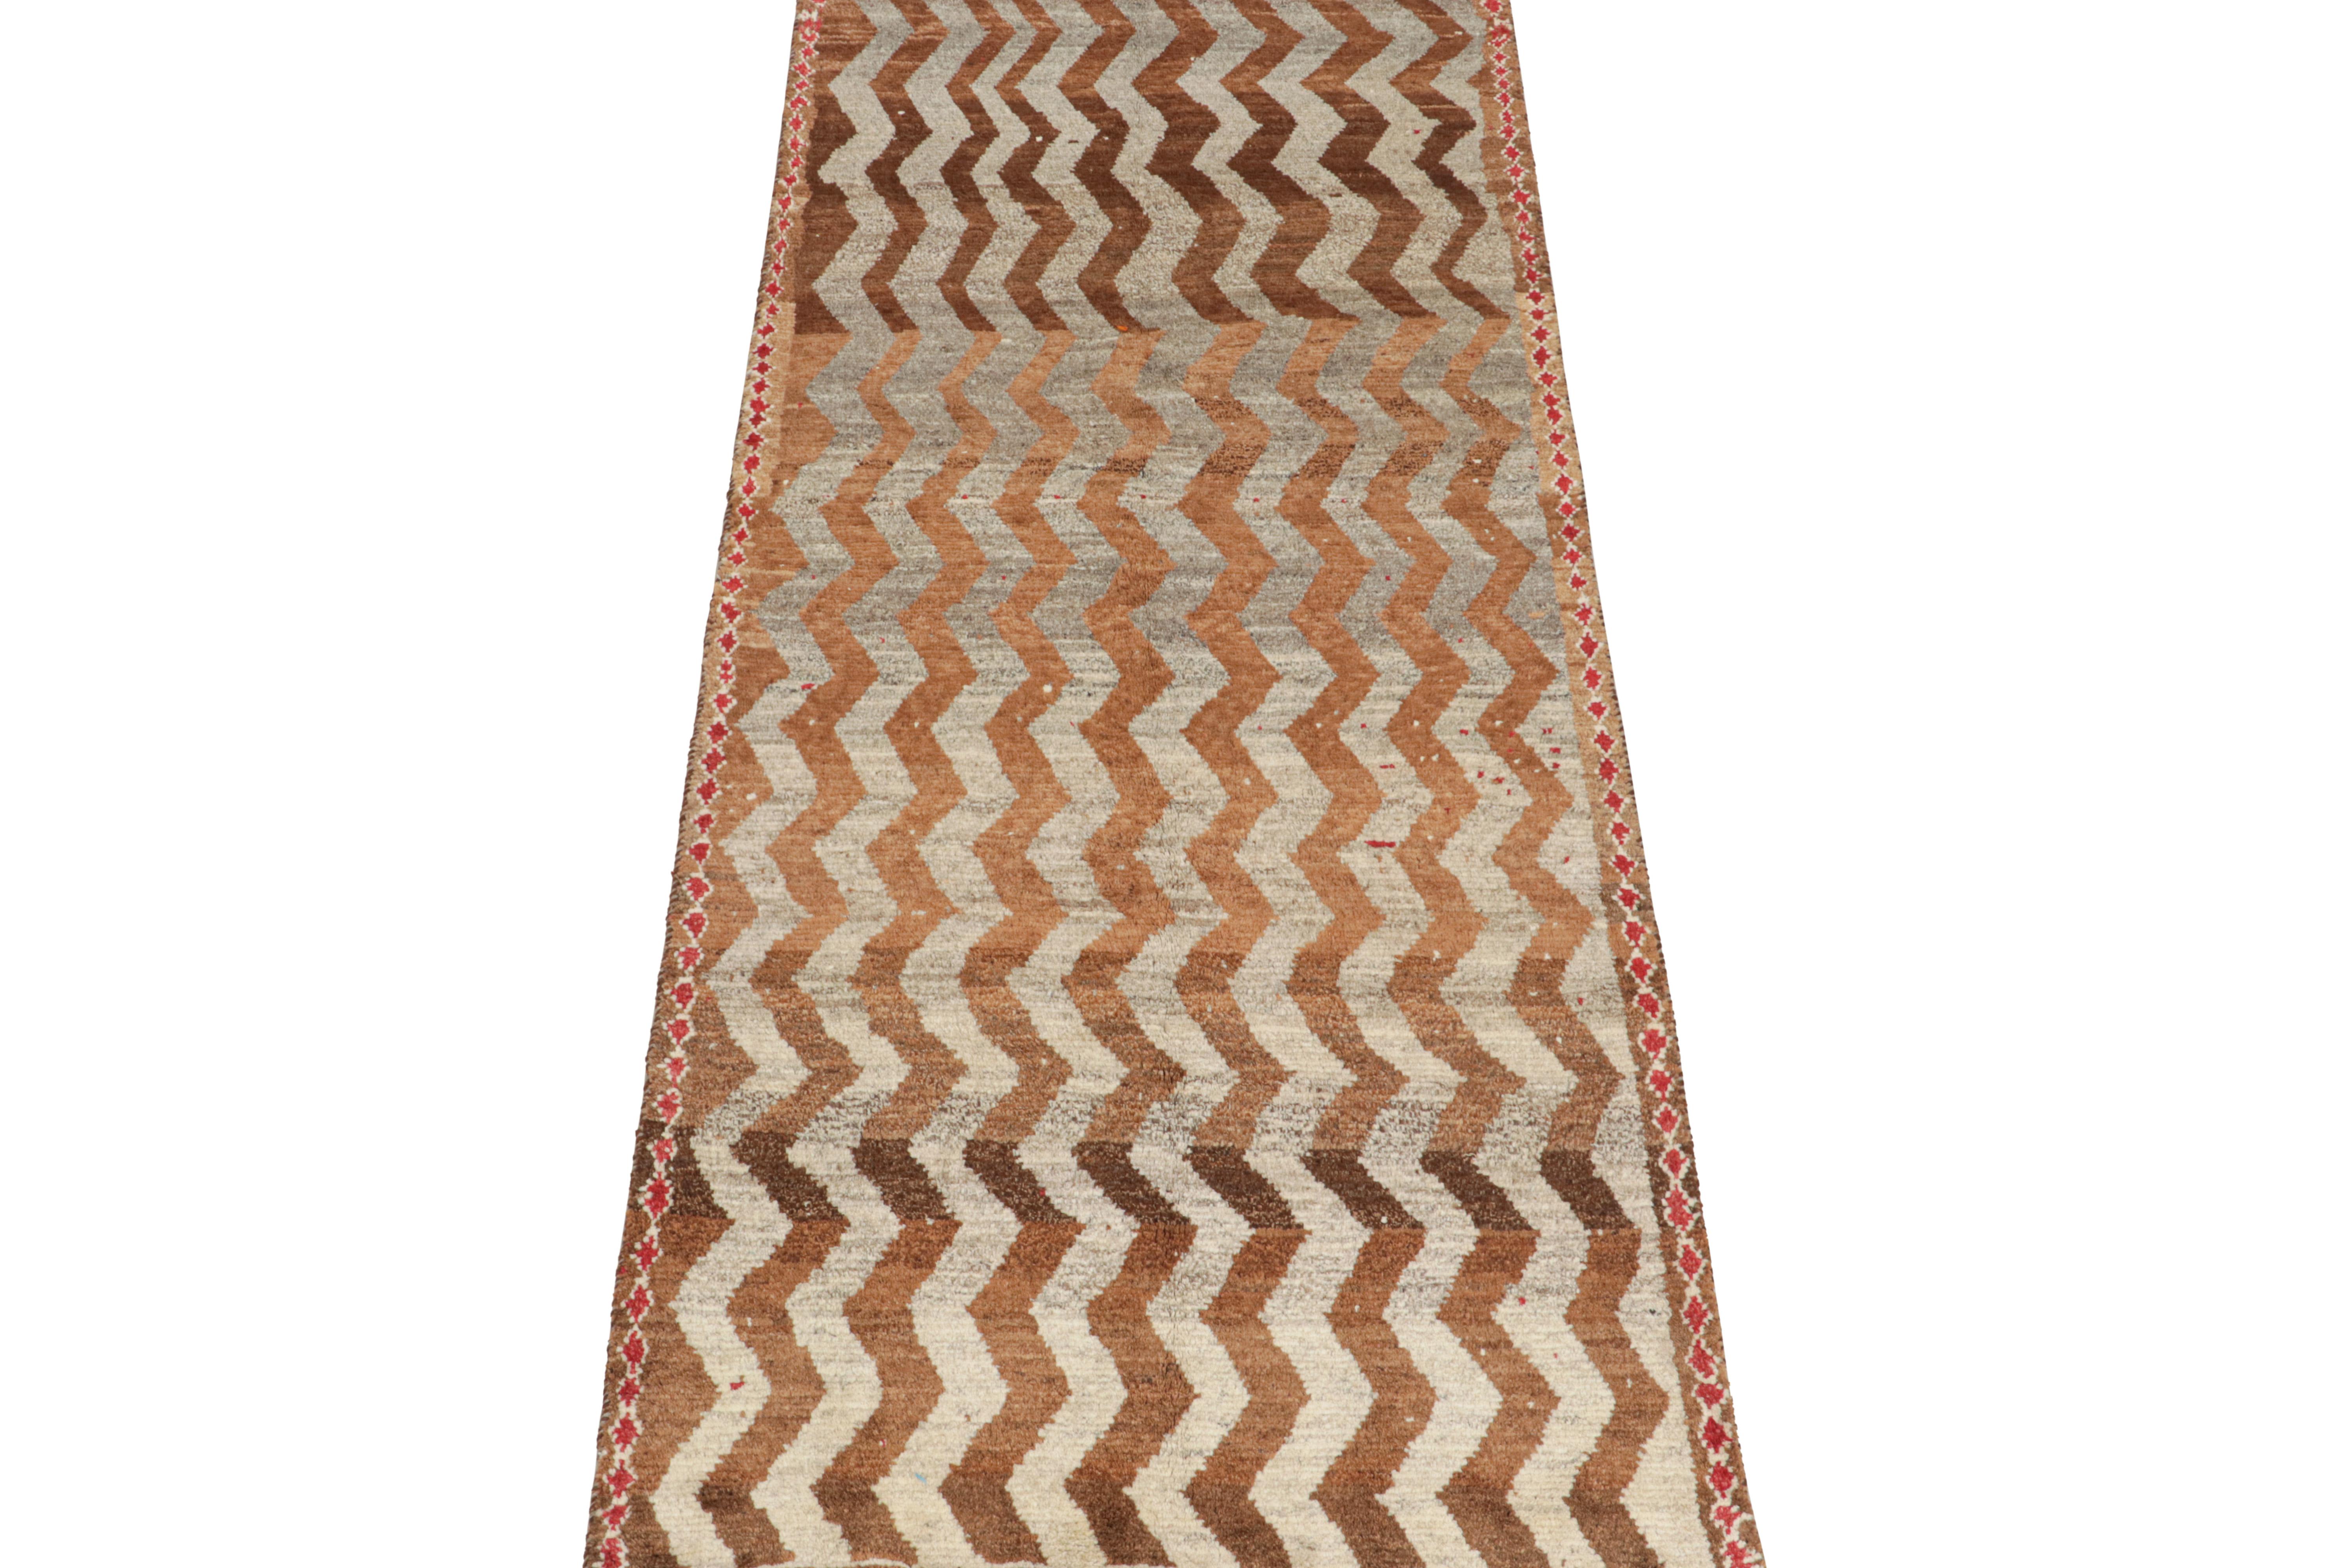 This vintage 4x9 Persian rug is a mid-century tribal piece, hand-knotted in wool circa 1950-1960.

Its design enjoys chevron patterns in rich brown, beige, and gray tones within a border of red diamonds. Connoisseurs will admire this rich piece of